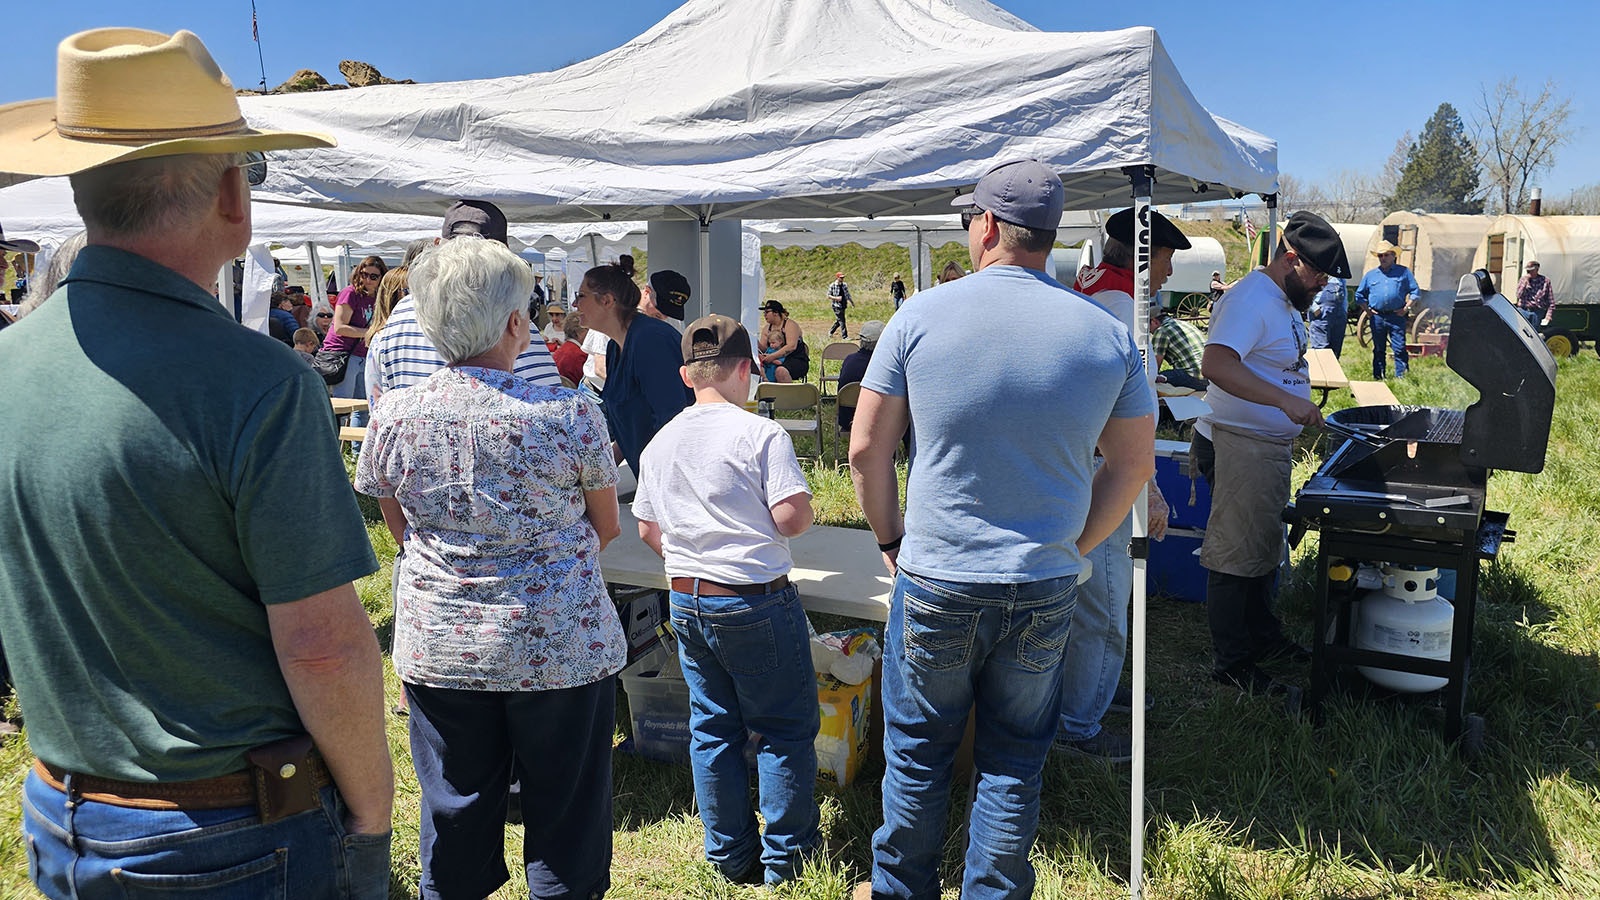 The line quickly grows for tasty Lukainka sausages, cooked by the Basque Big Horn Club.